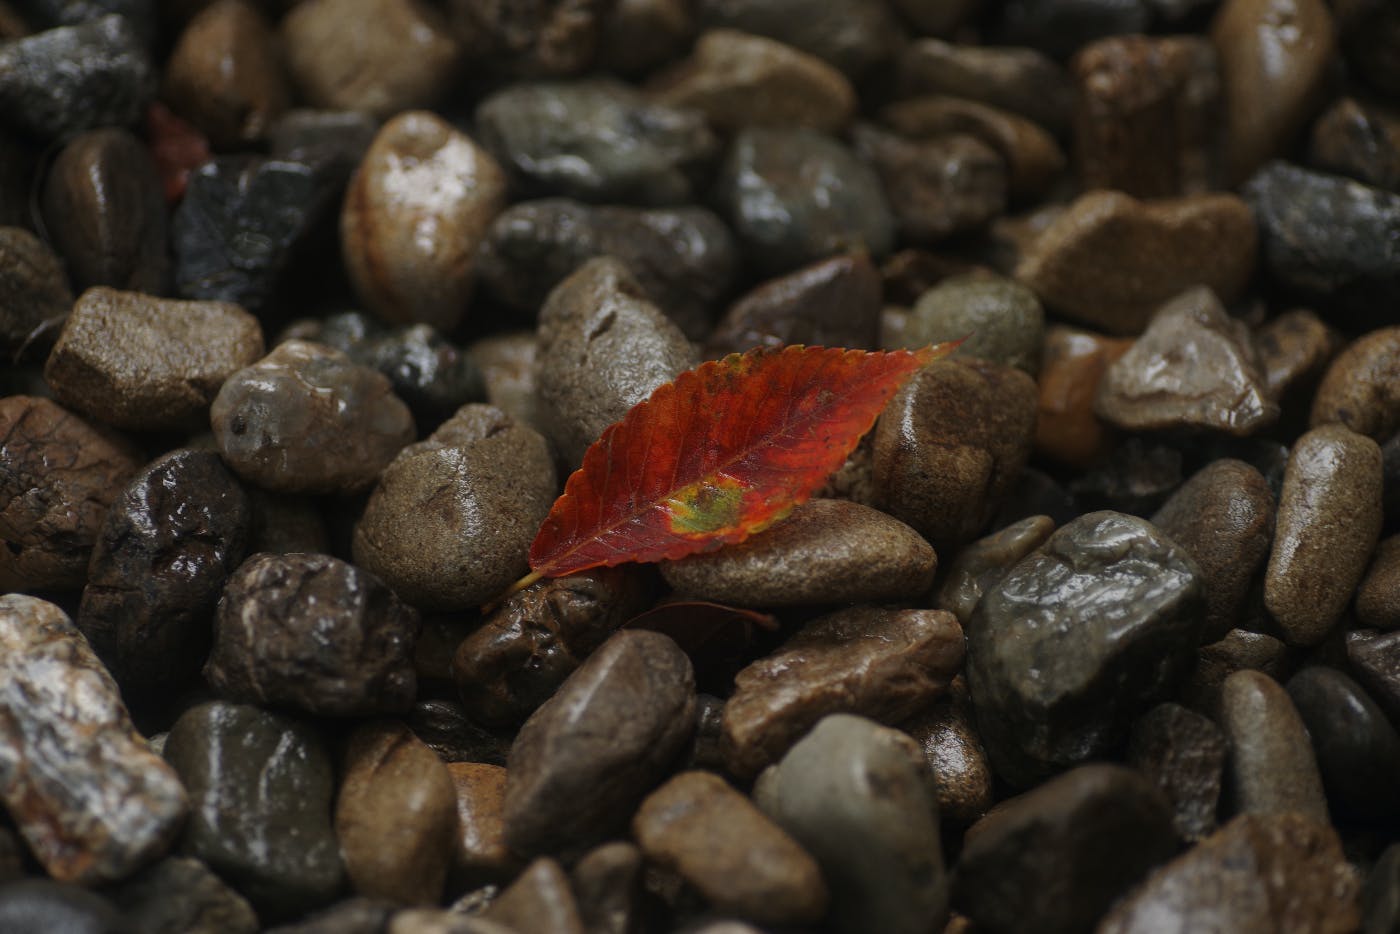 a small red leaf among wet rocks